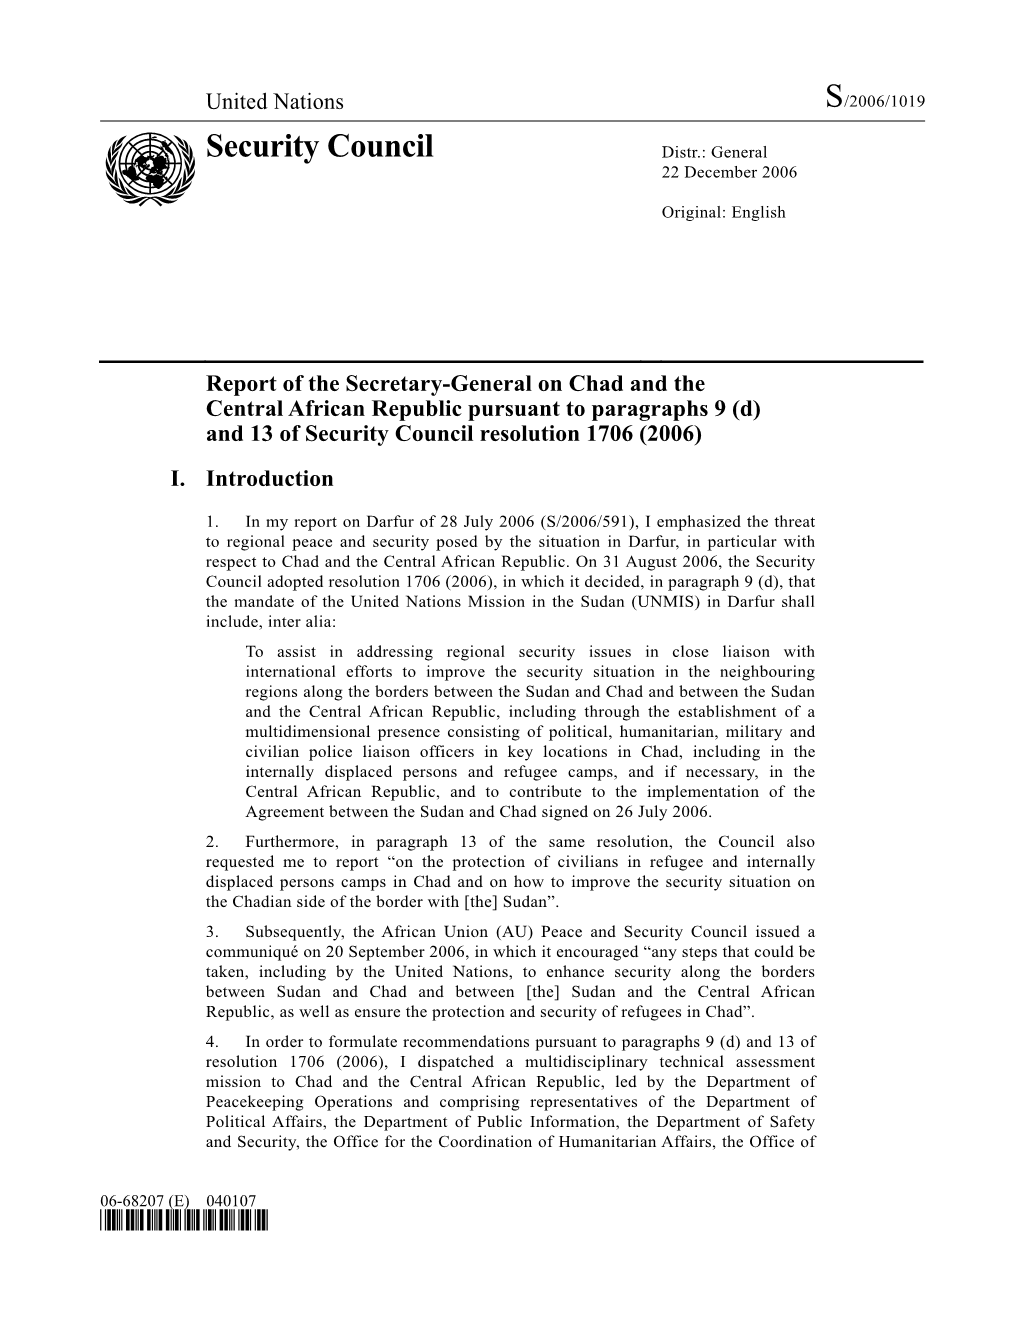 Report of the Secretary-General on Chad and the Central African Republic Pursuant to Paragraphs 9 (D) and 13 of Security Council Resolution 1706 (2006)